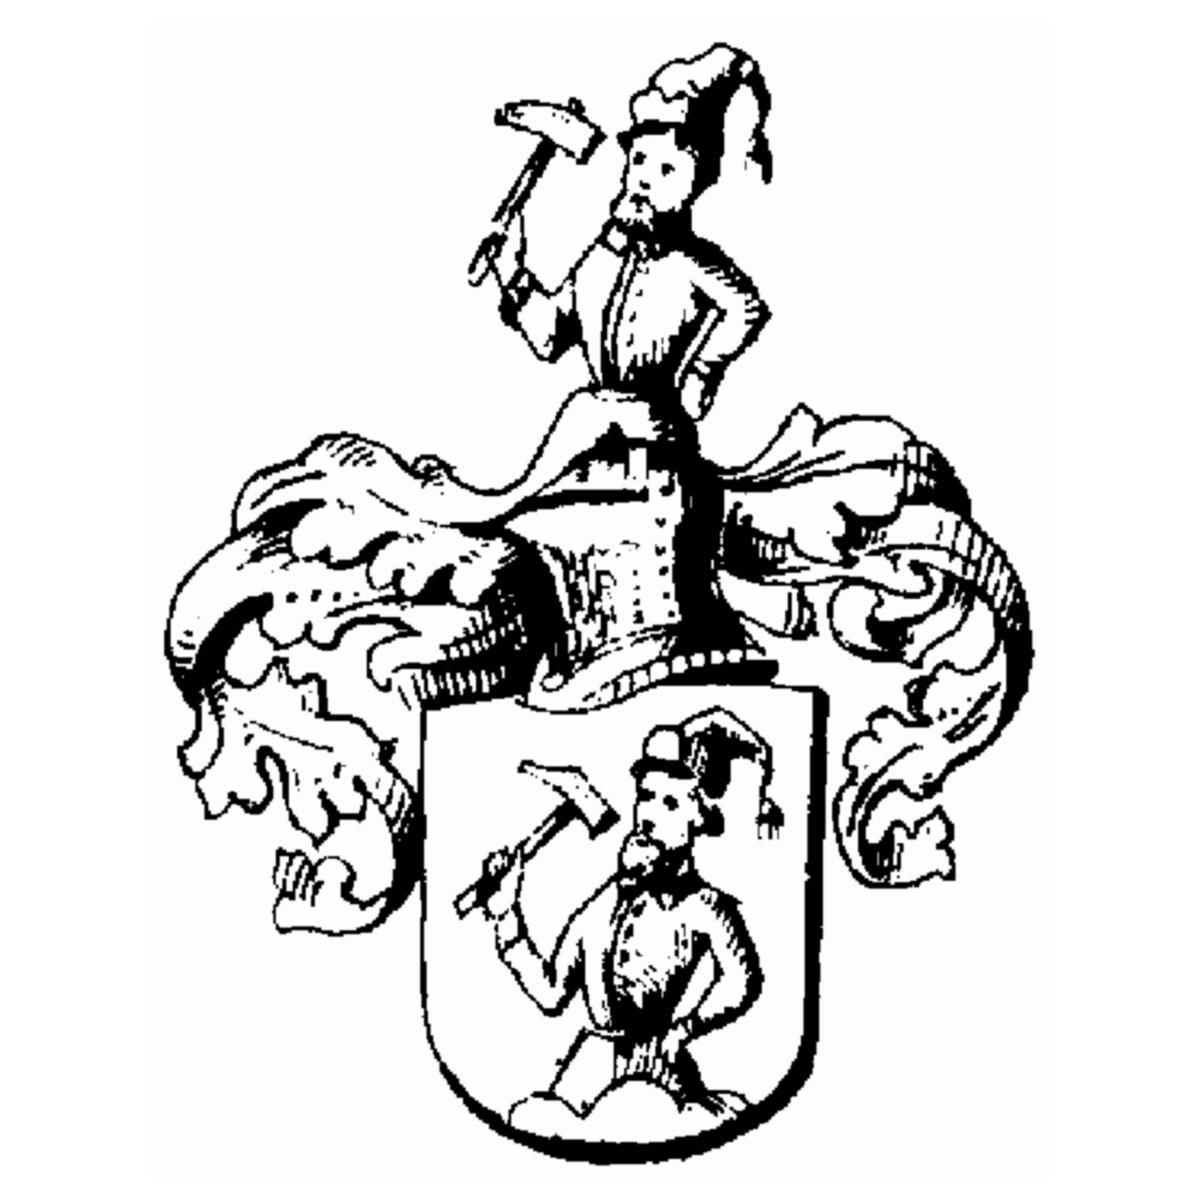 Coat of arms of family Tison